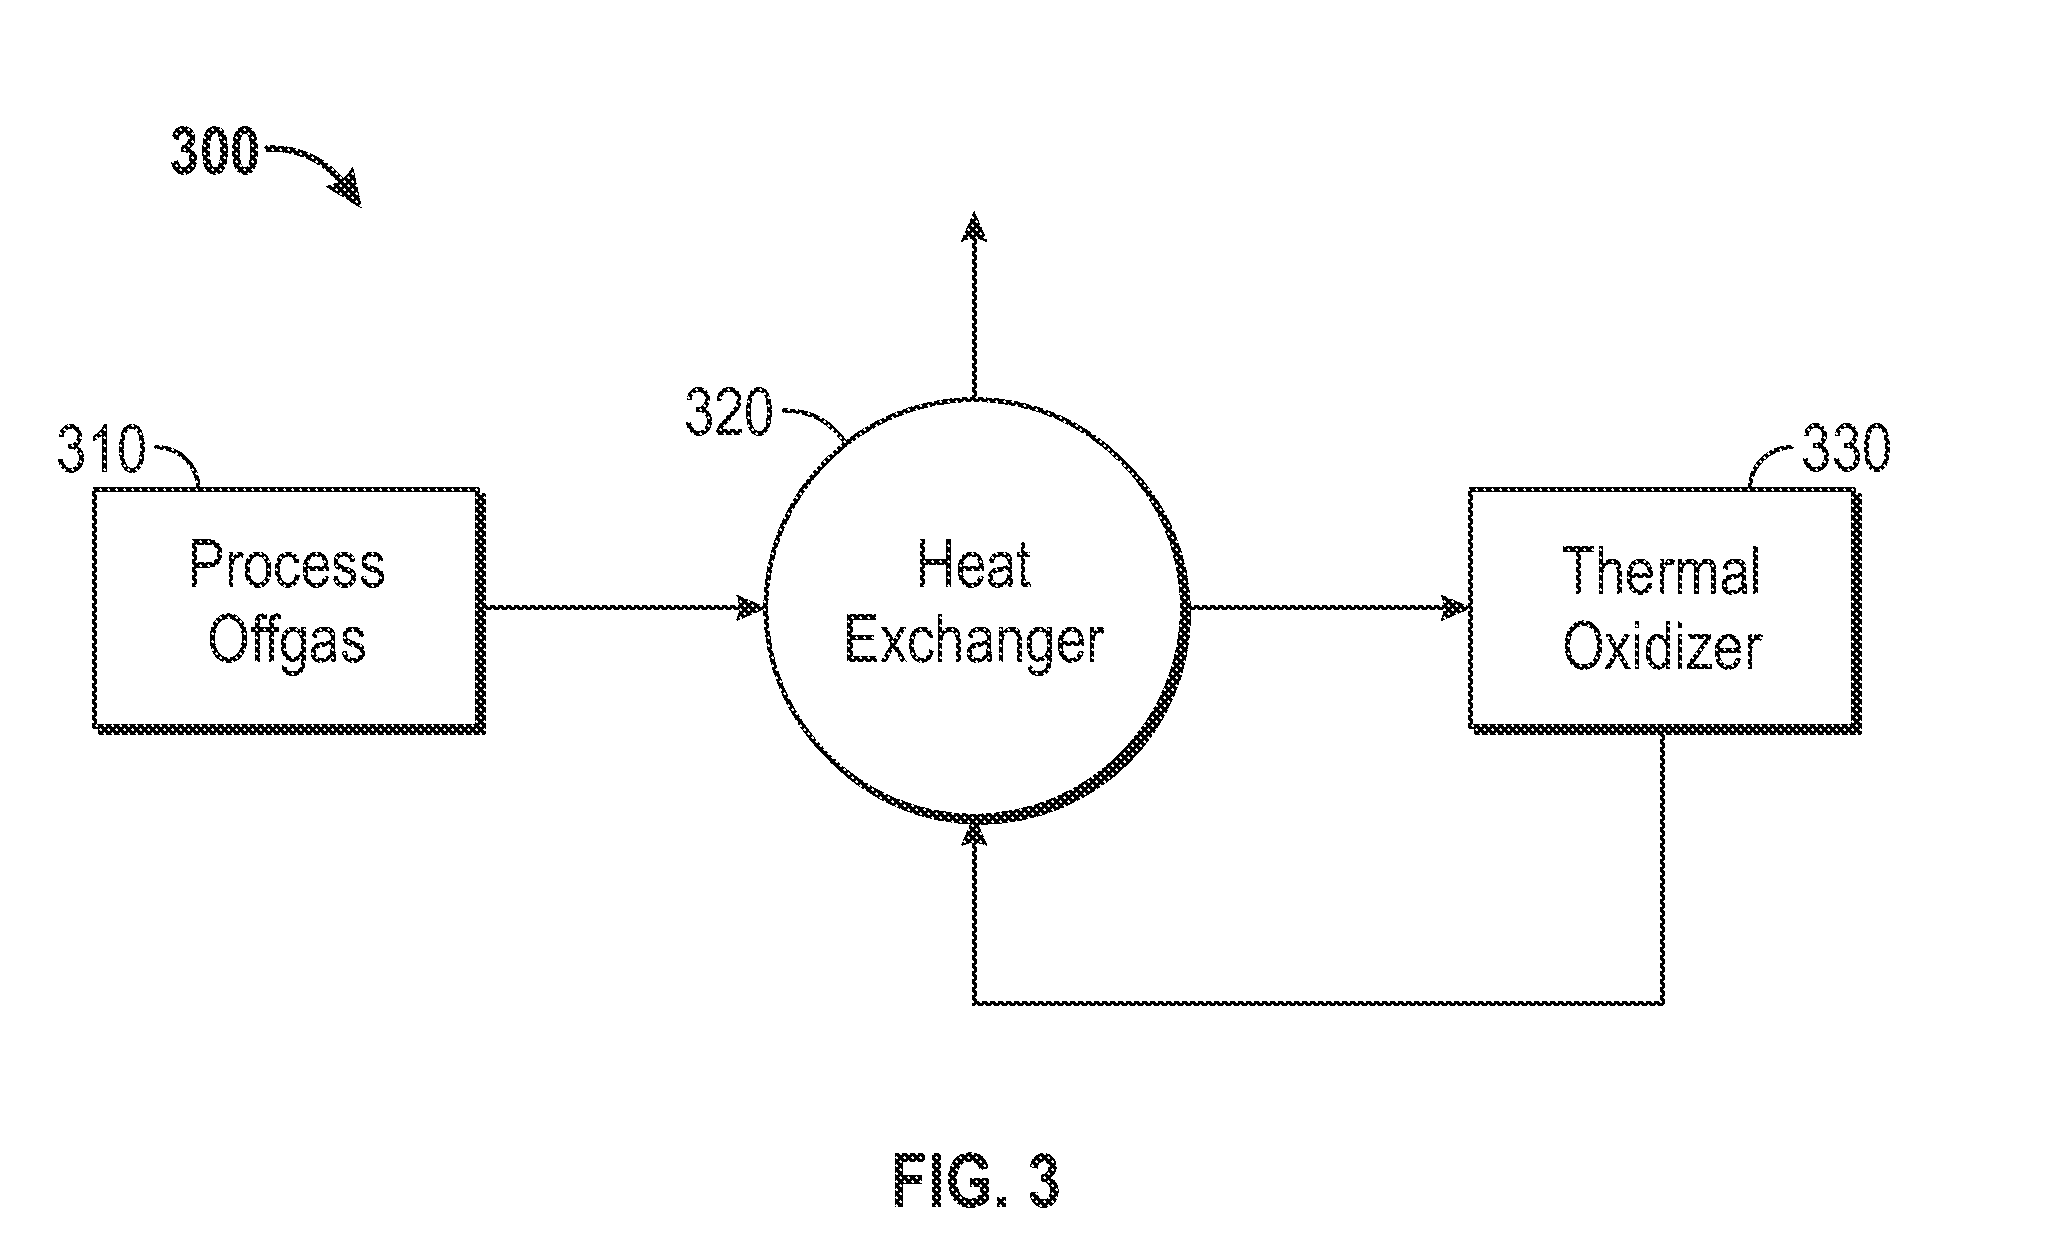 Regenerative thermal oxidizer for the reduction or elimination of supplemental fuel gas consumption